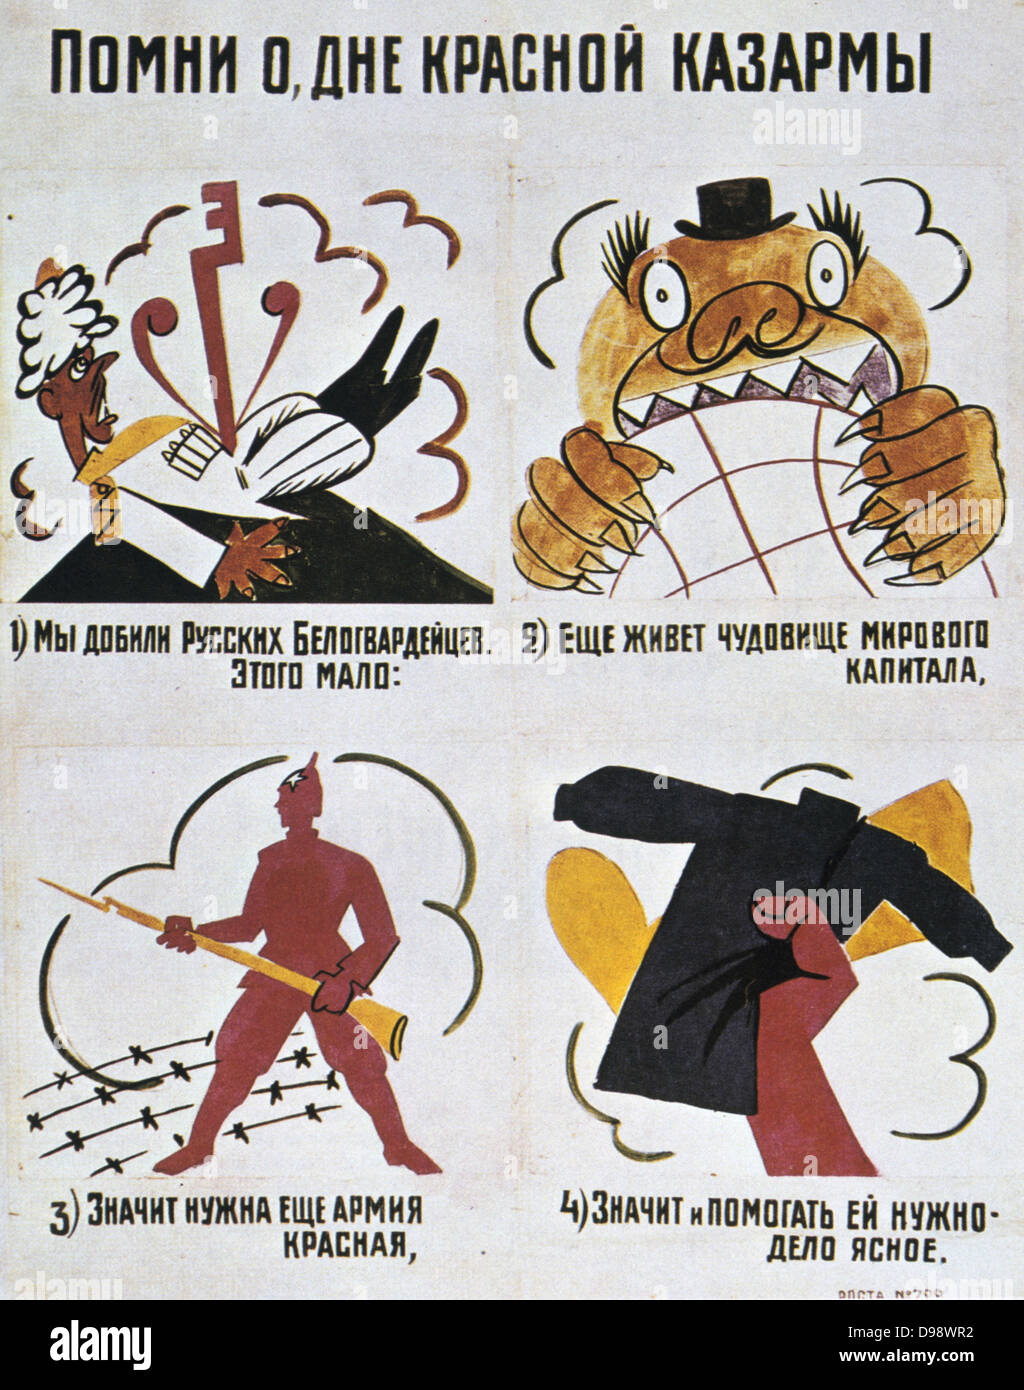 Fenetre ROSTA', 1920, (Russian State Telegraph Agency) Caricature on the Red Army by Vladimir Mayakovsky (1893-1930) Soviet poet, playwright and draughtsman. Russia USSR Communism Communist Stock Photo